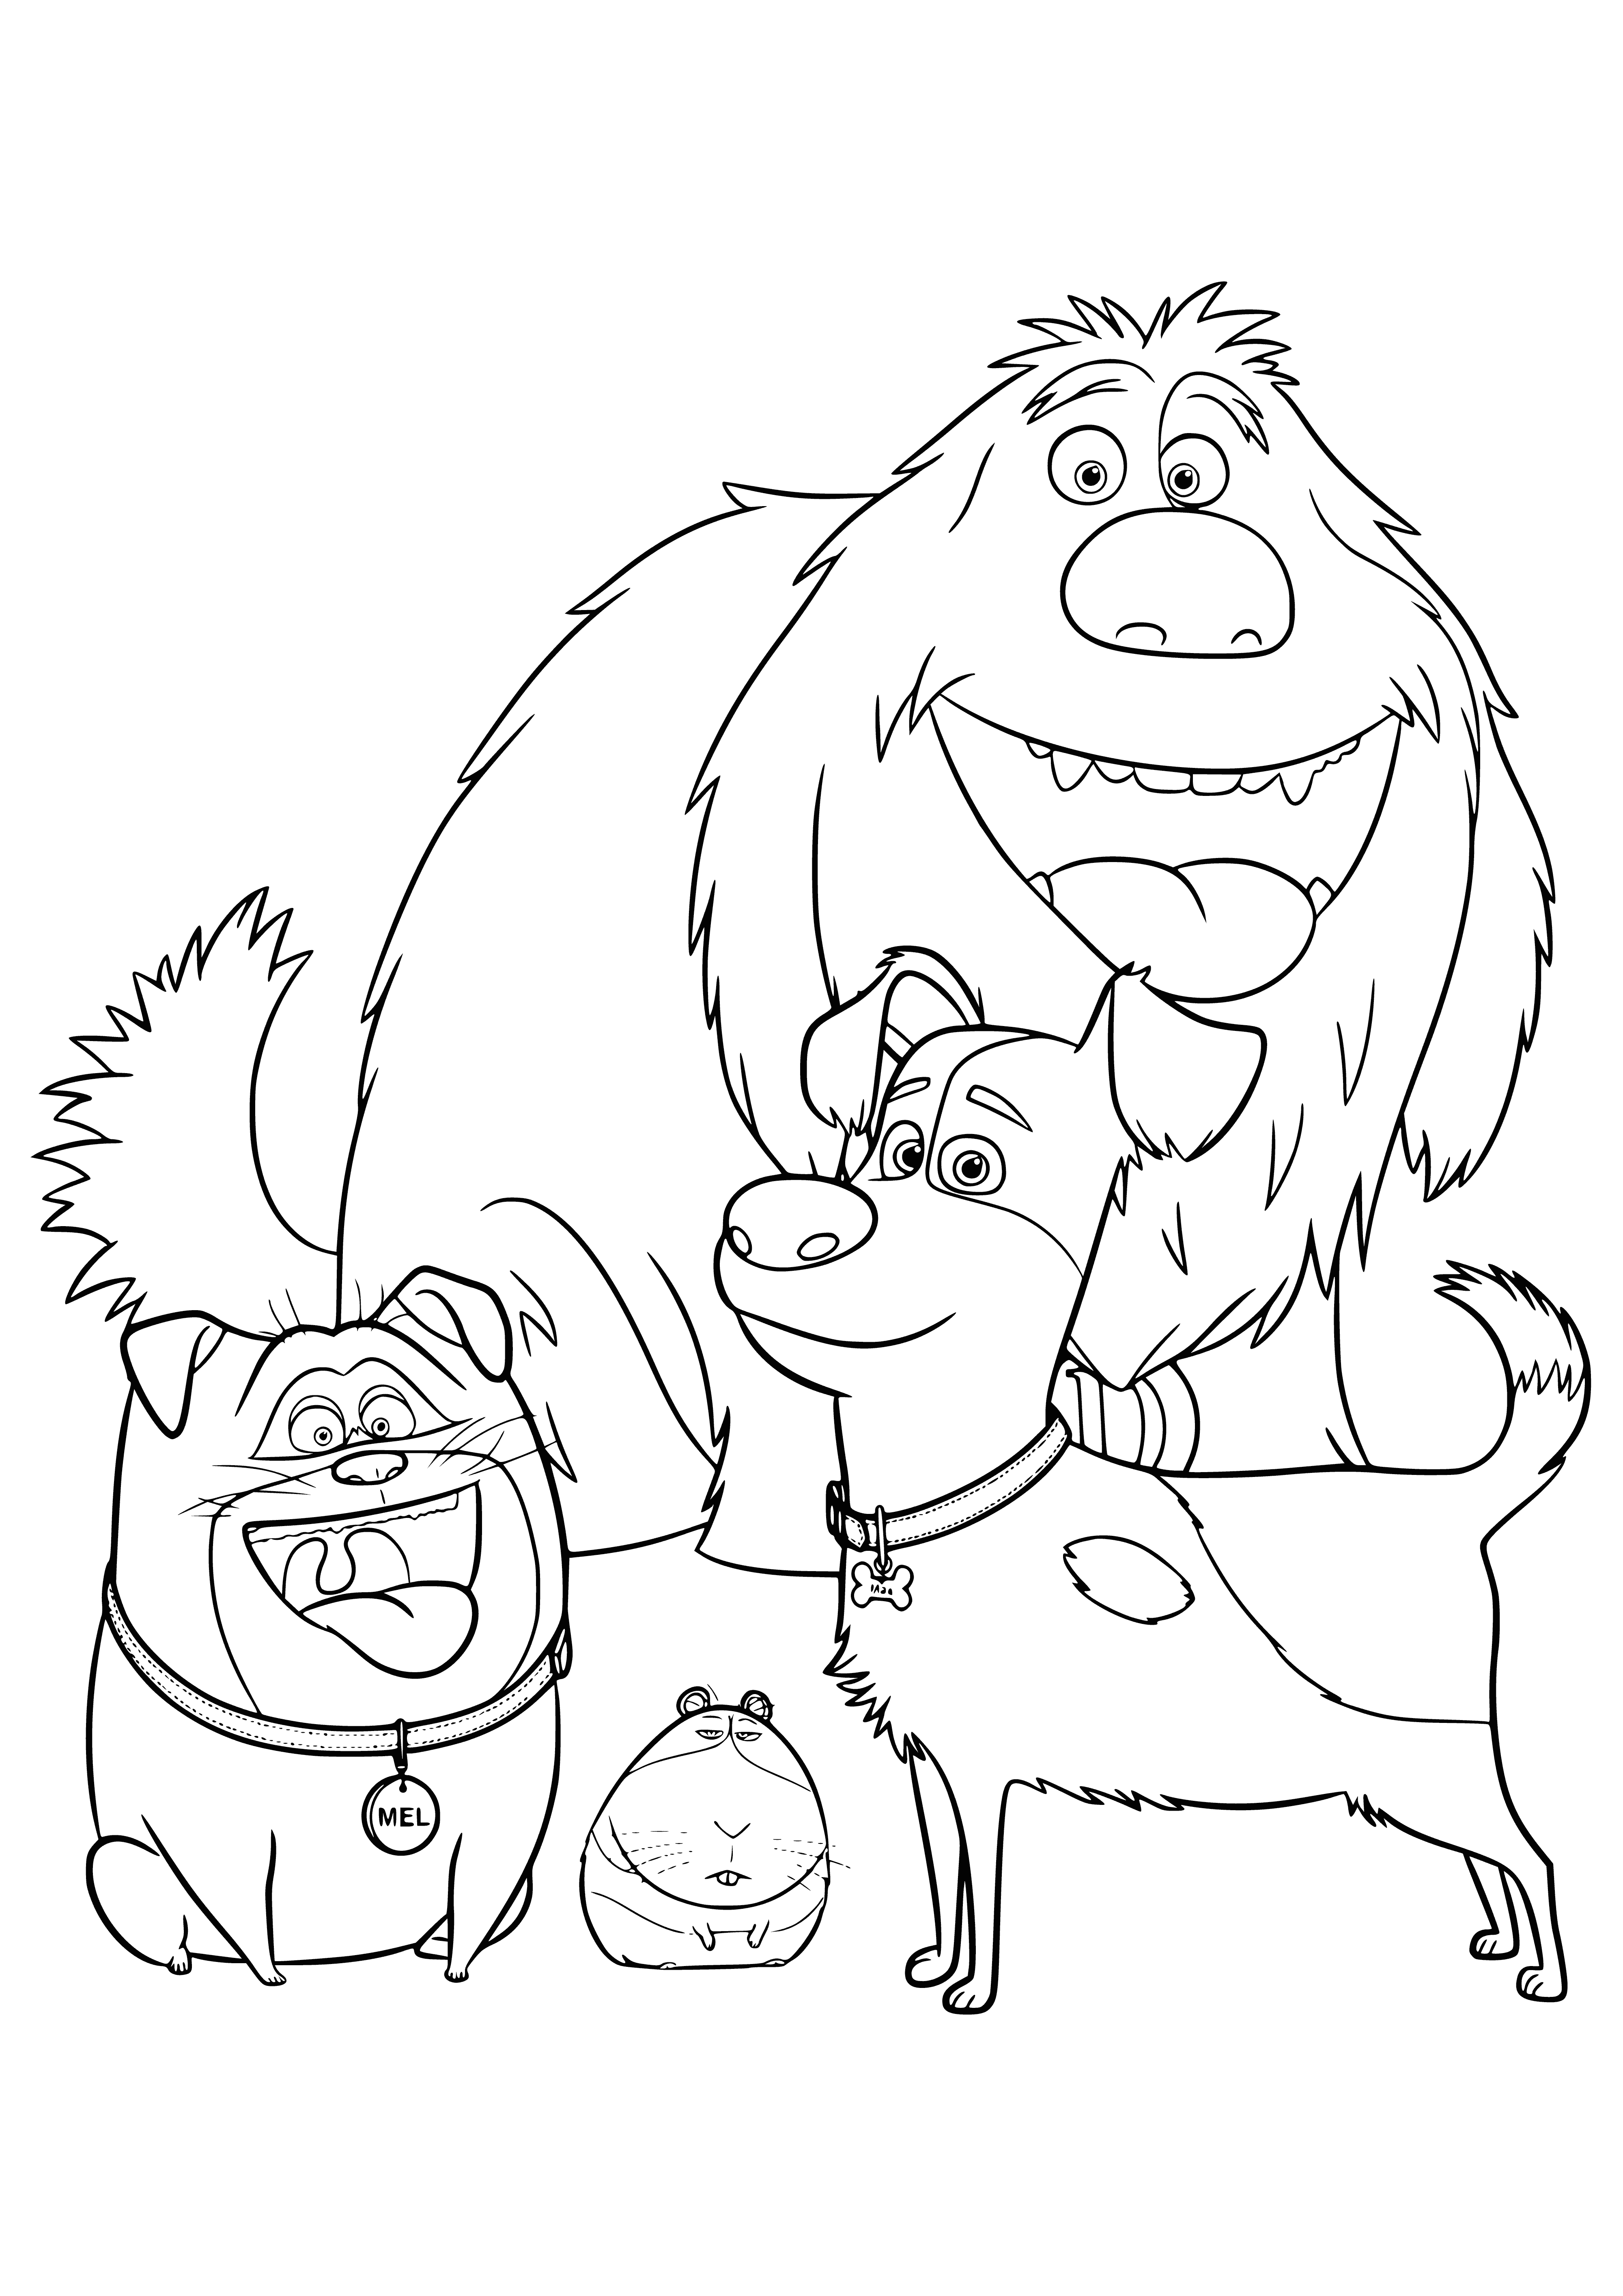 The Secret Life of Pets coloring page